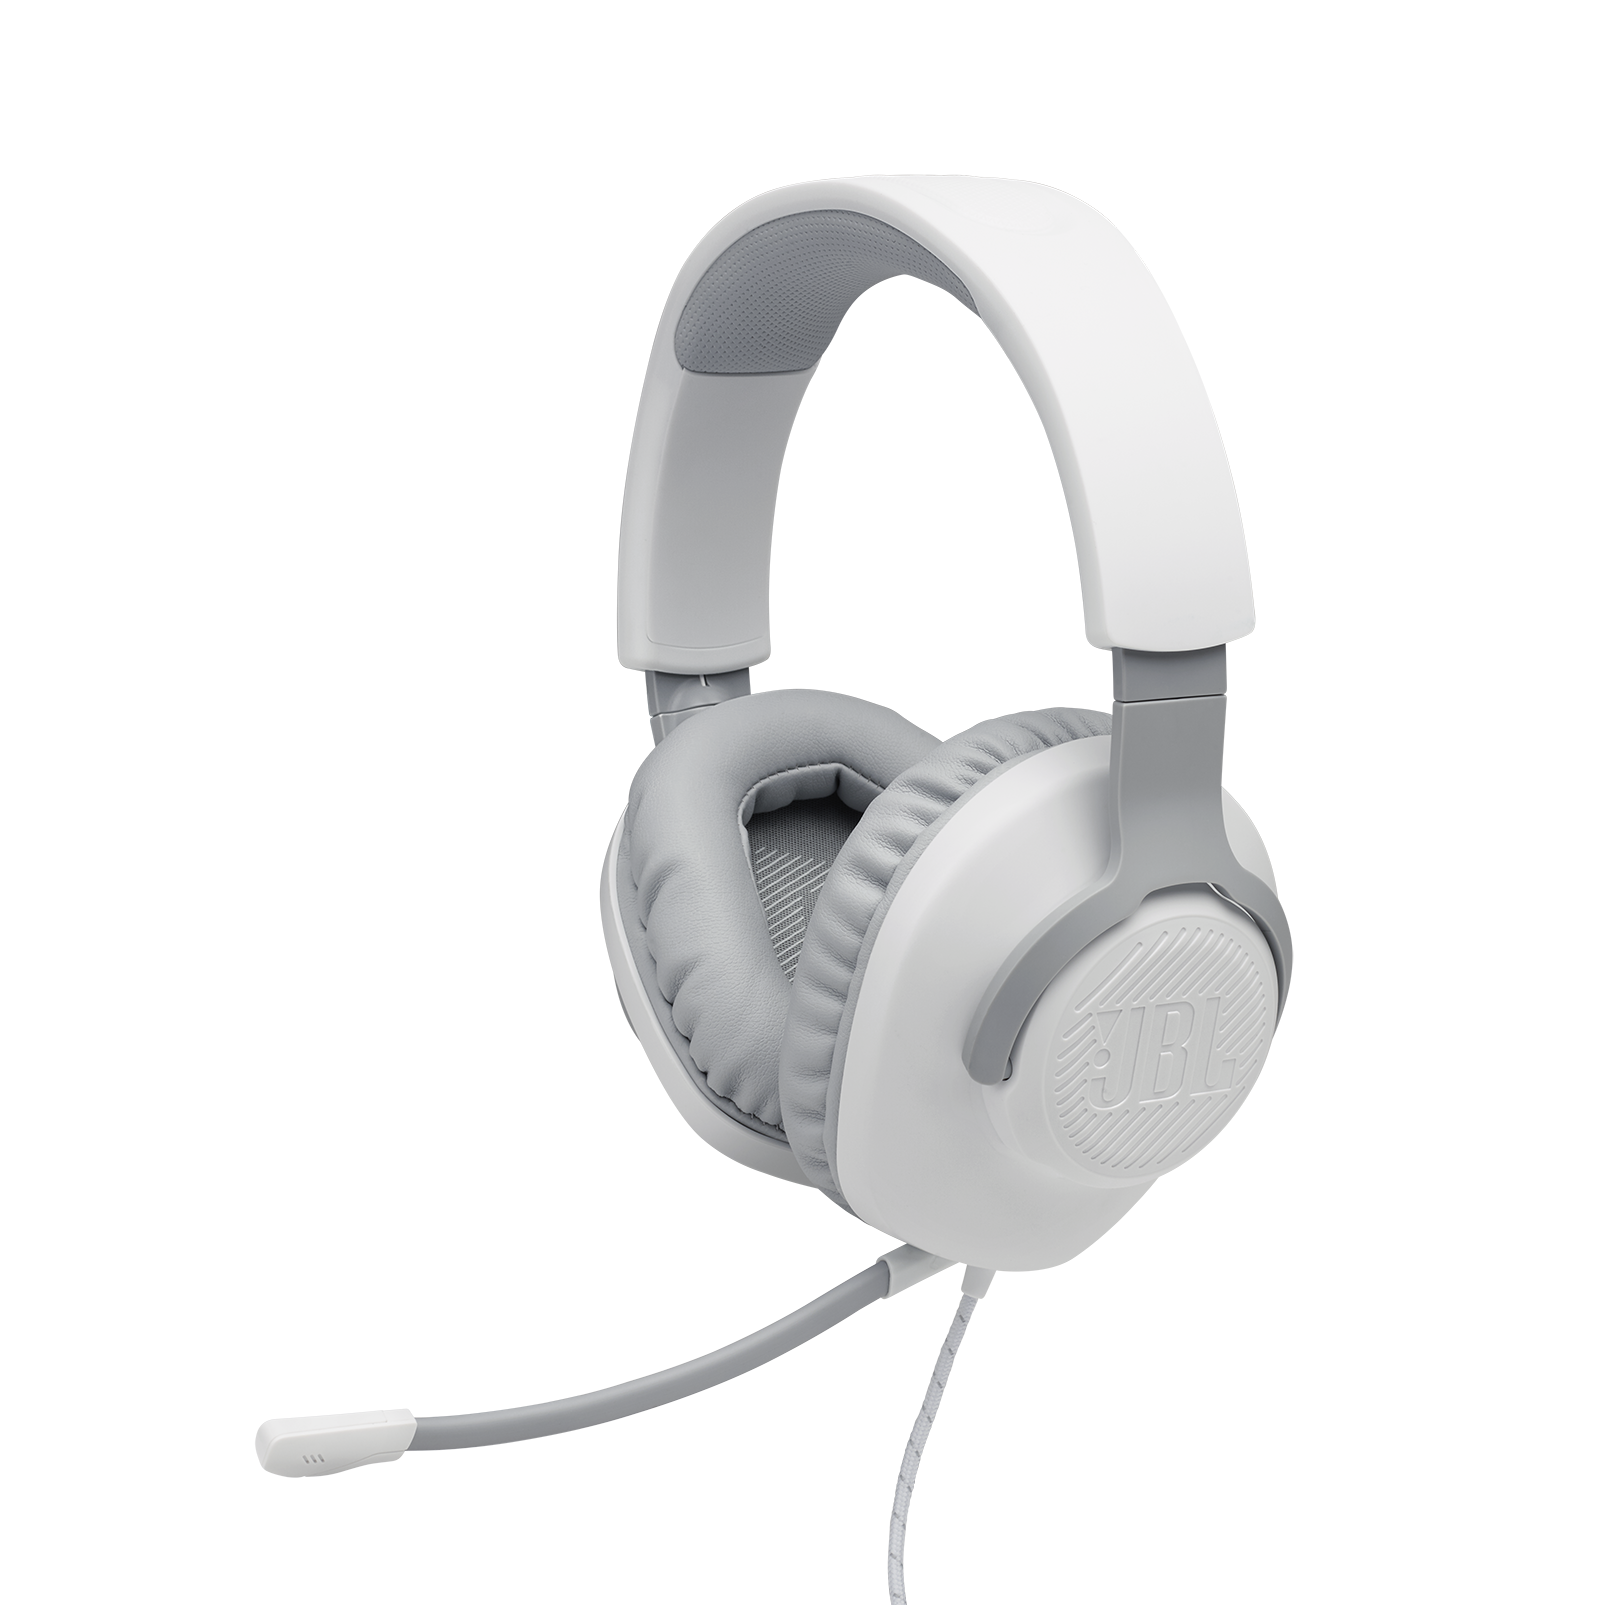 JBL Quantum 100 - White - Wired over-ear gaming headset with flip-up mic - Detailshot 1